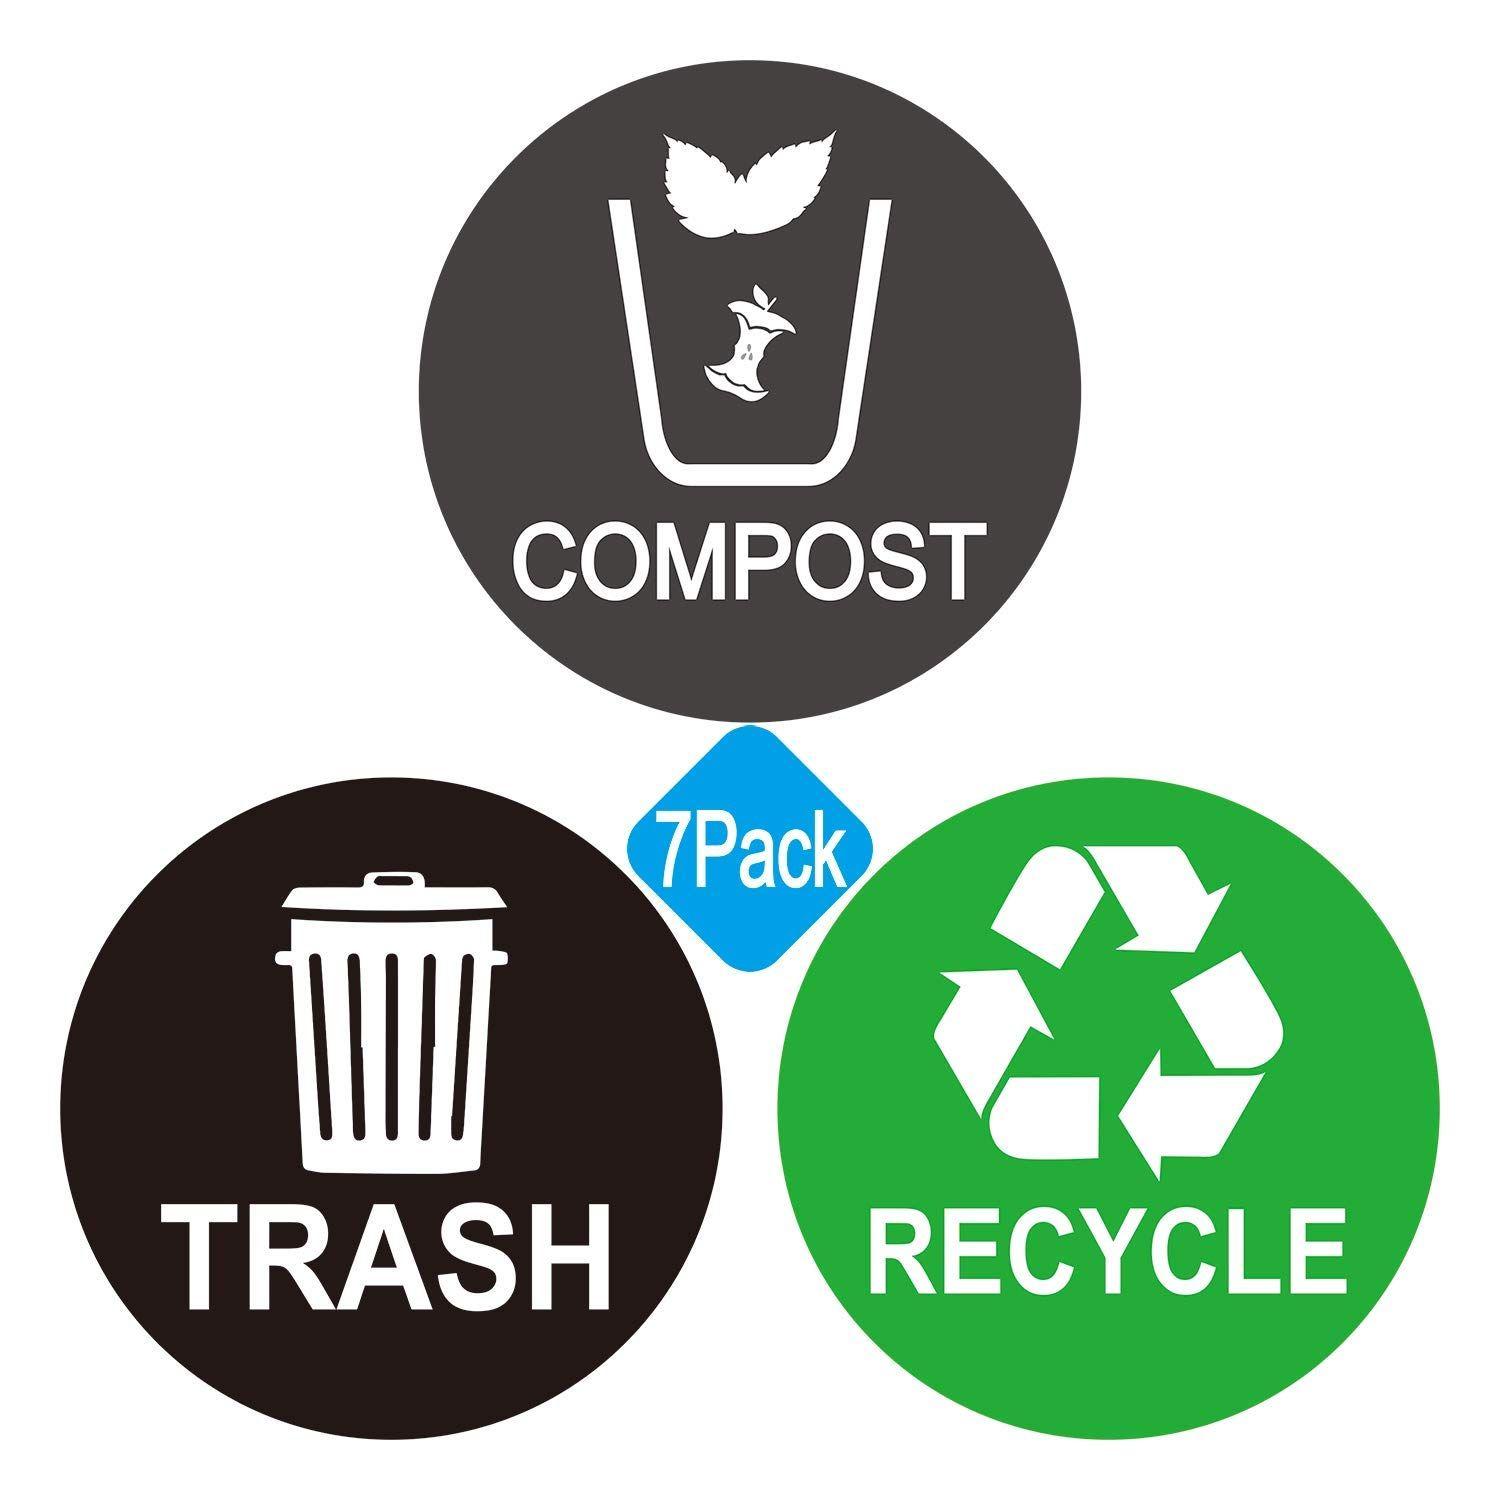 Compost Logo - Amazon.com: Recycle and Trash bin Logo Stickers - Recycle Sticker ...